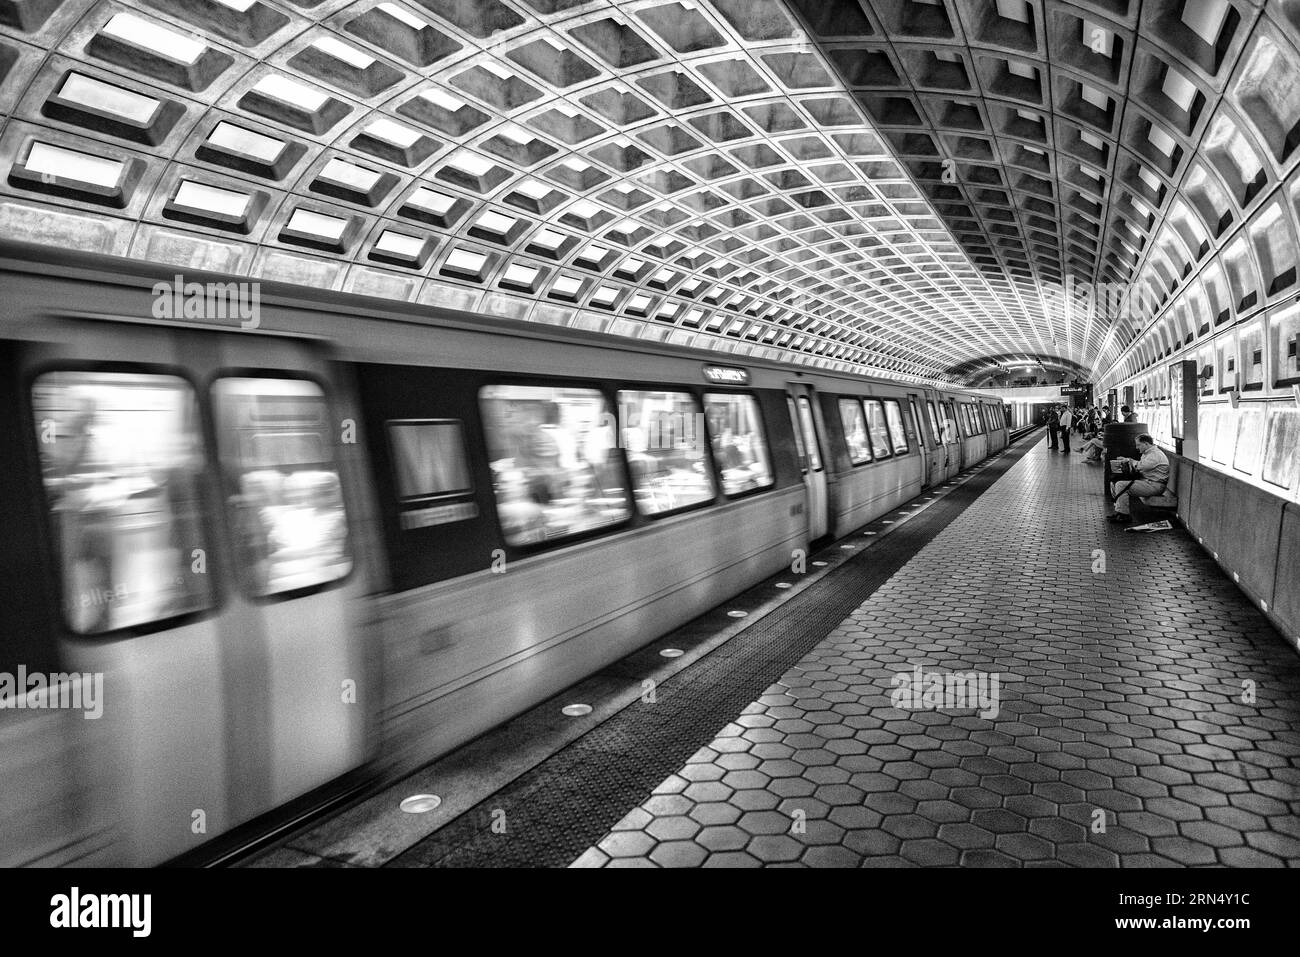 [Washington DC metro] subway WASHINGTON DC, United States — A train arrives at one of the distinctive domed stations of the Washington Metropolitan Area Transit Authority subway system in the Washington DC area. This station is in Ballston, Arlington, a few stops out from downtown Washington DC. Stock Photo